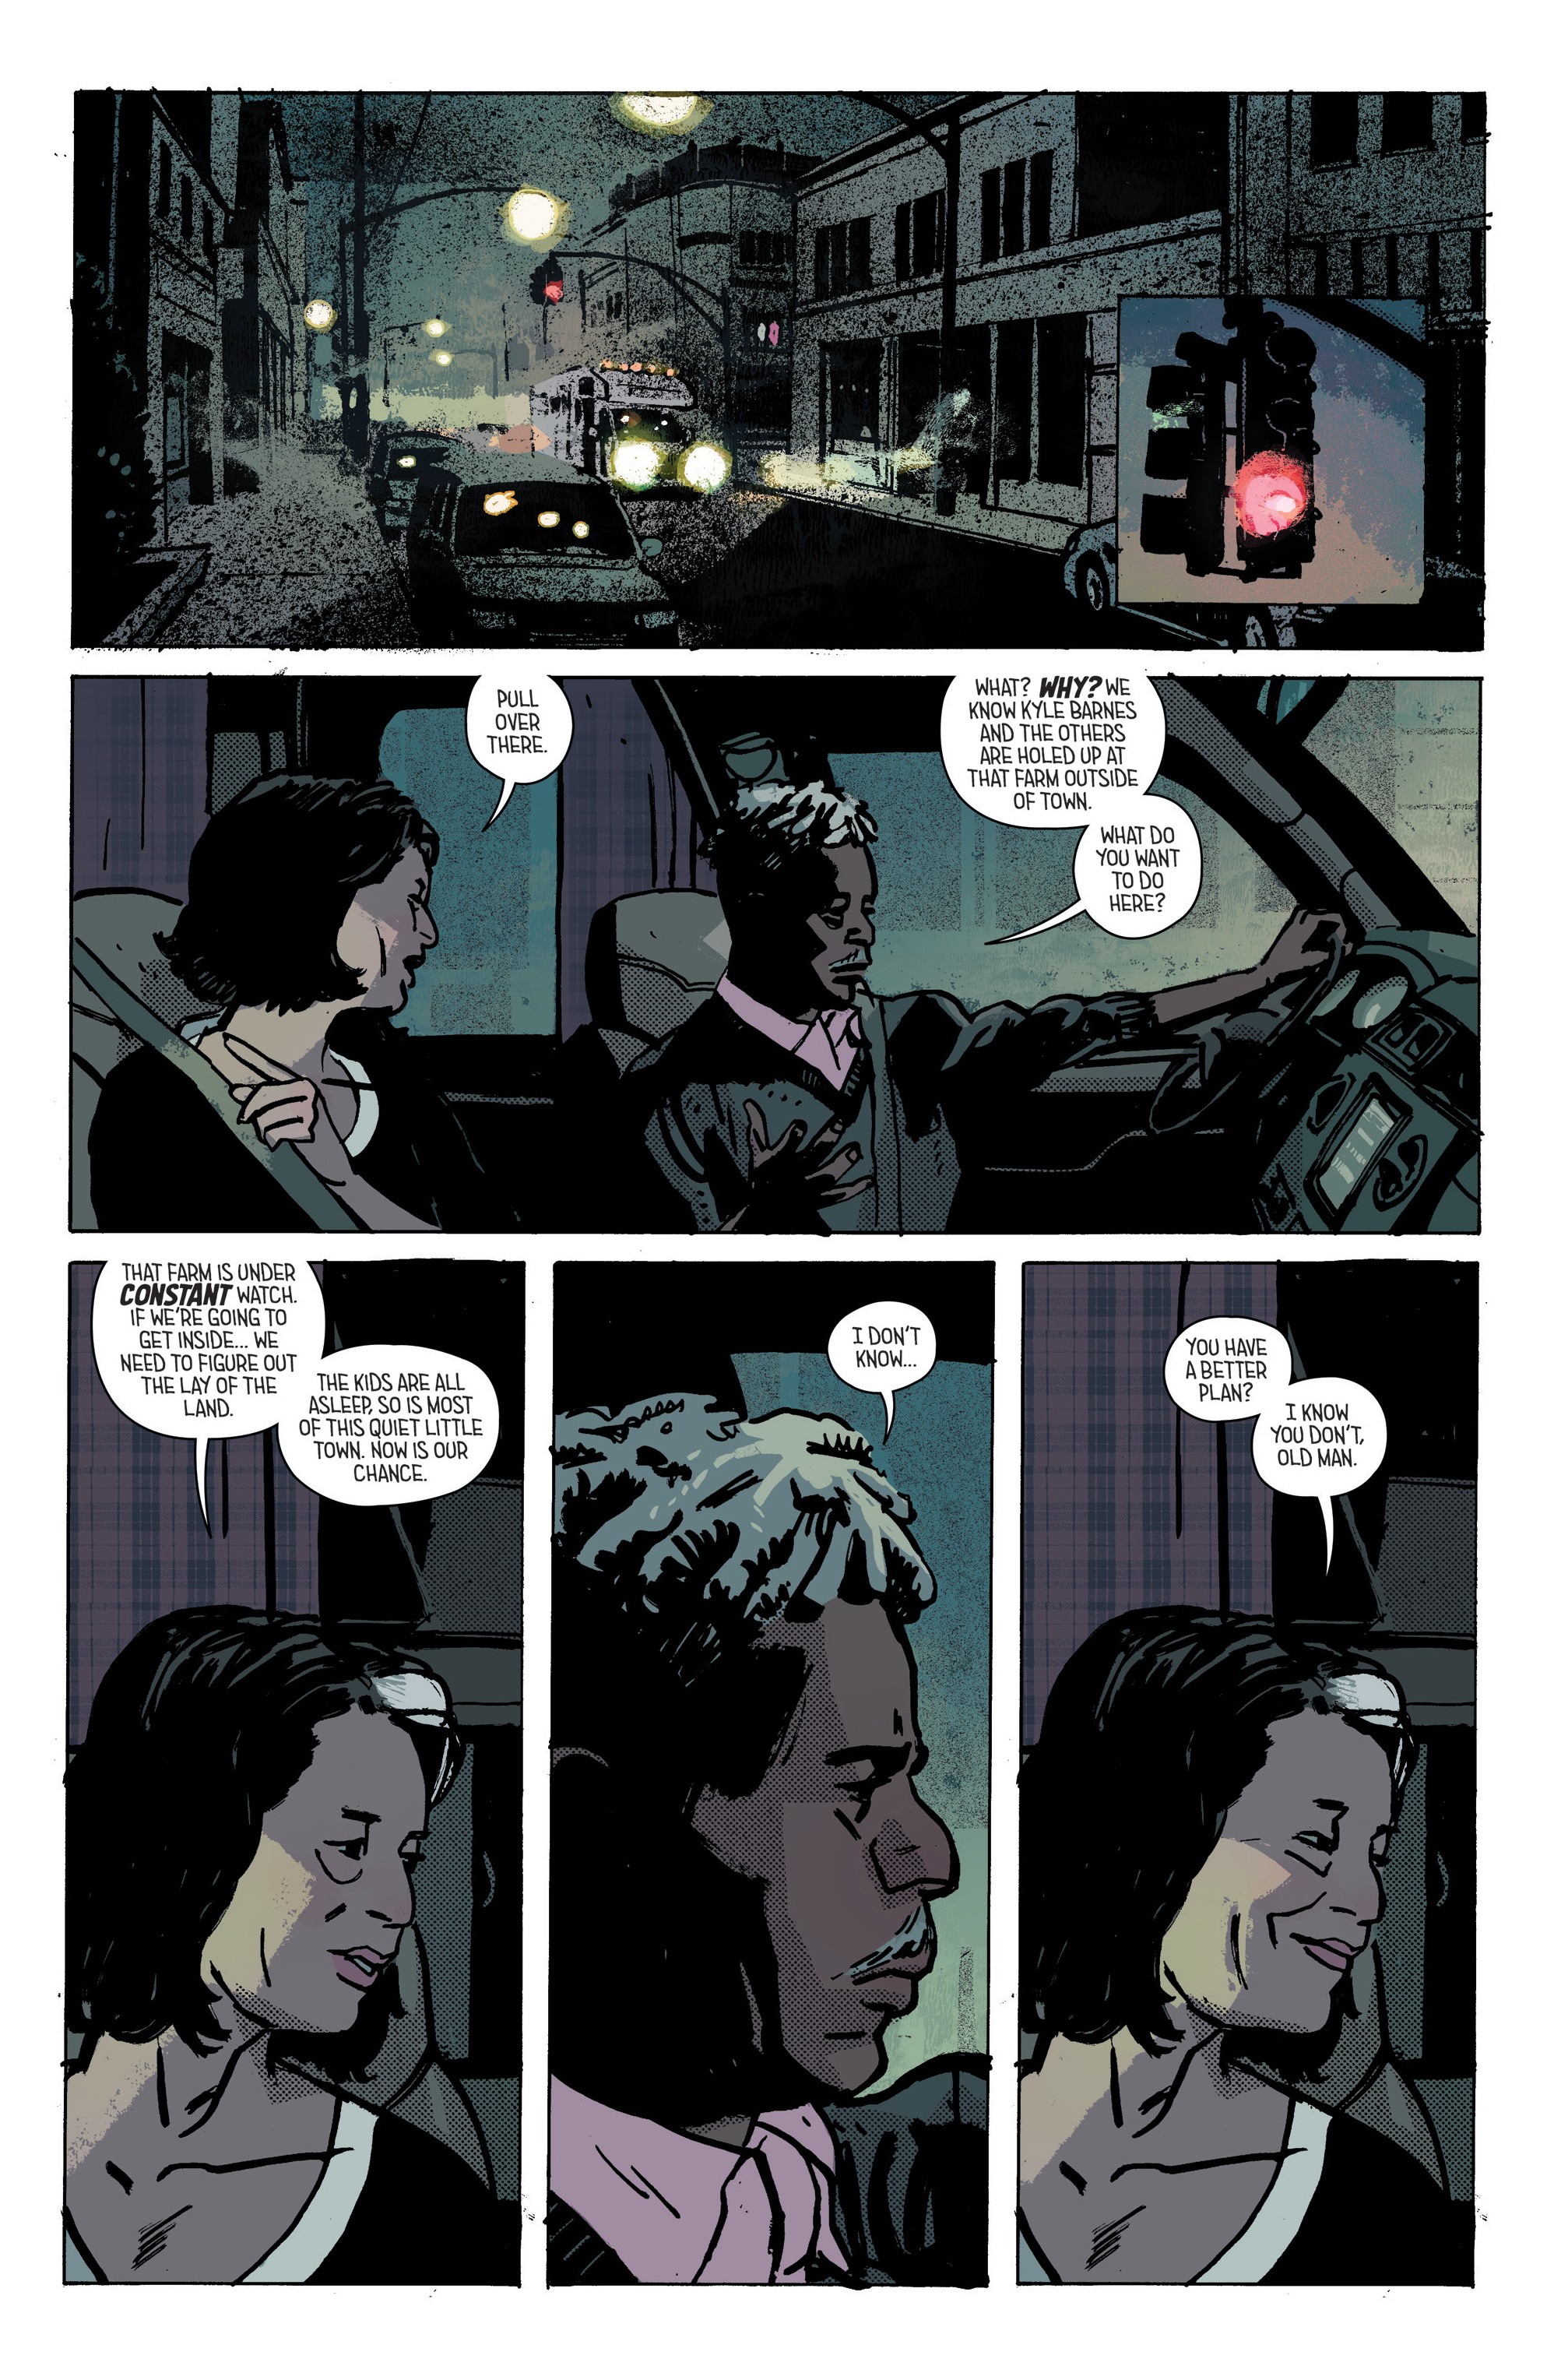 Outcast by Kirkman & Azaceta (2014-): Chapter 40 - Page 3